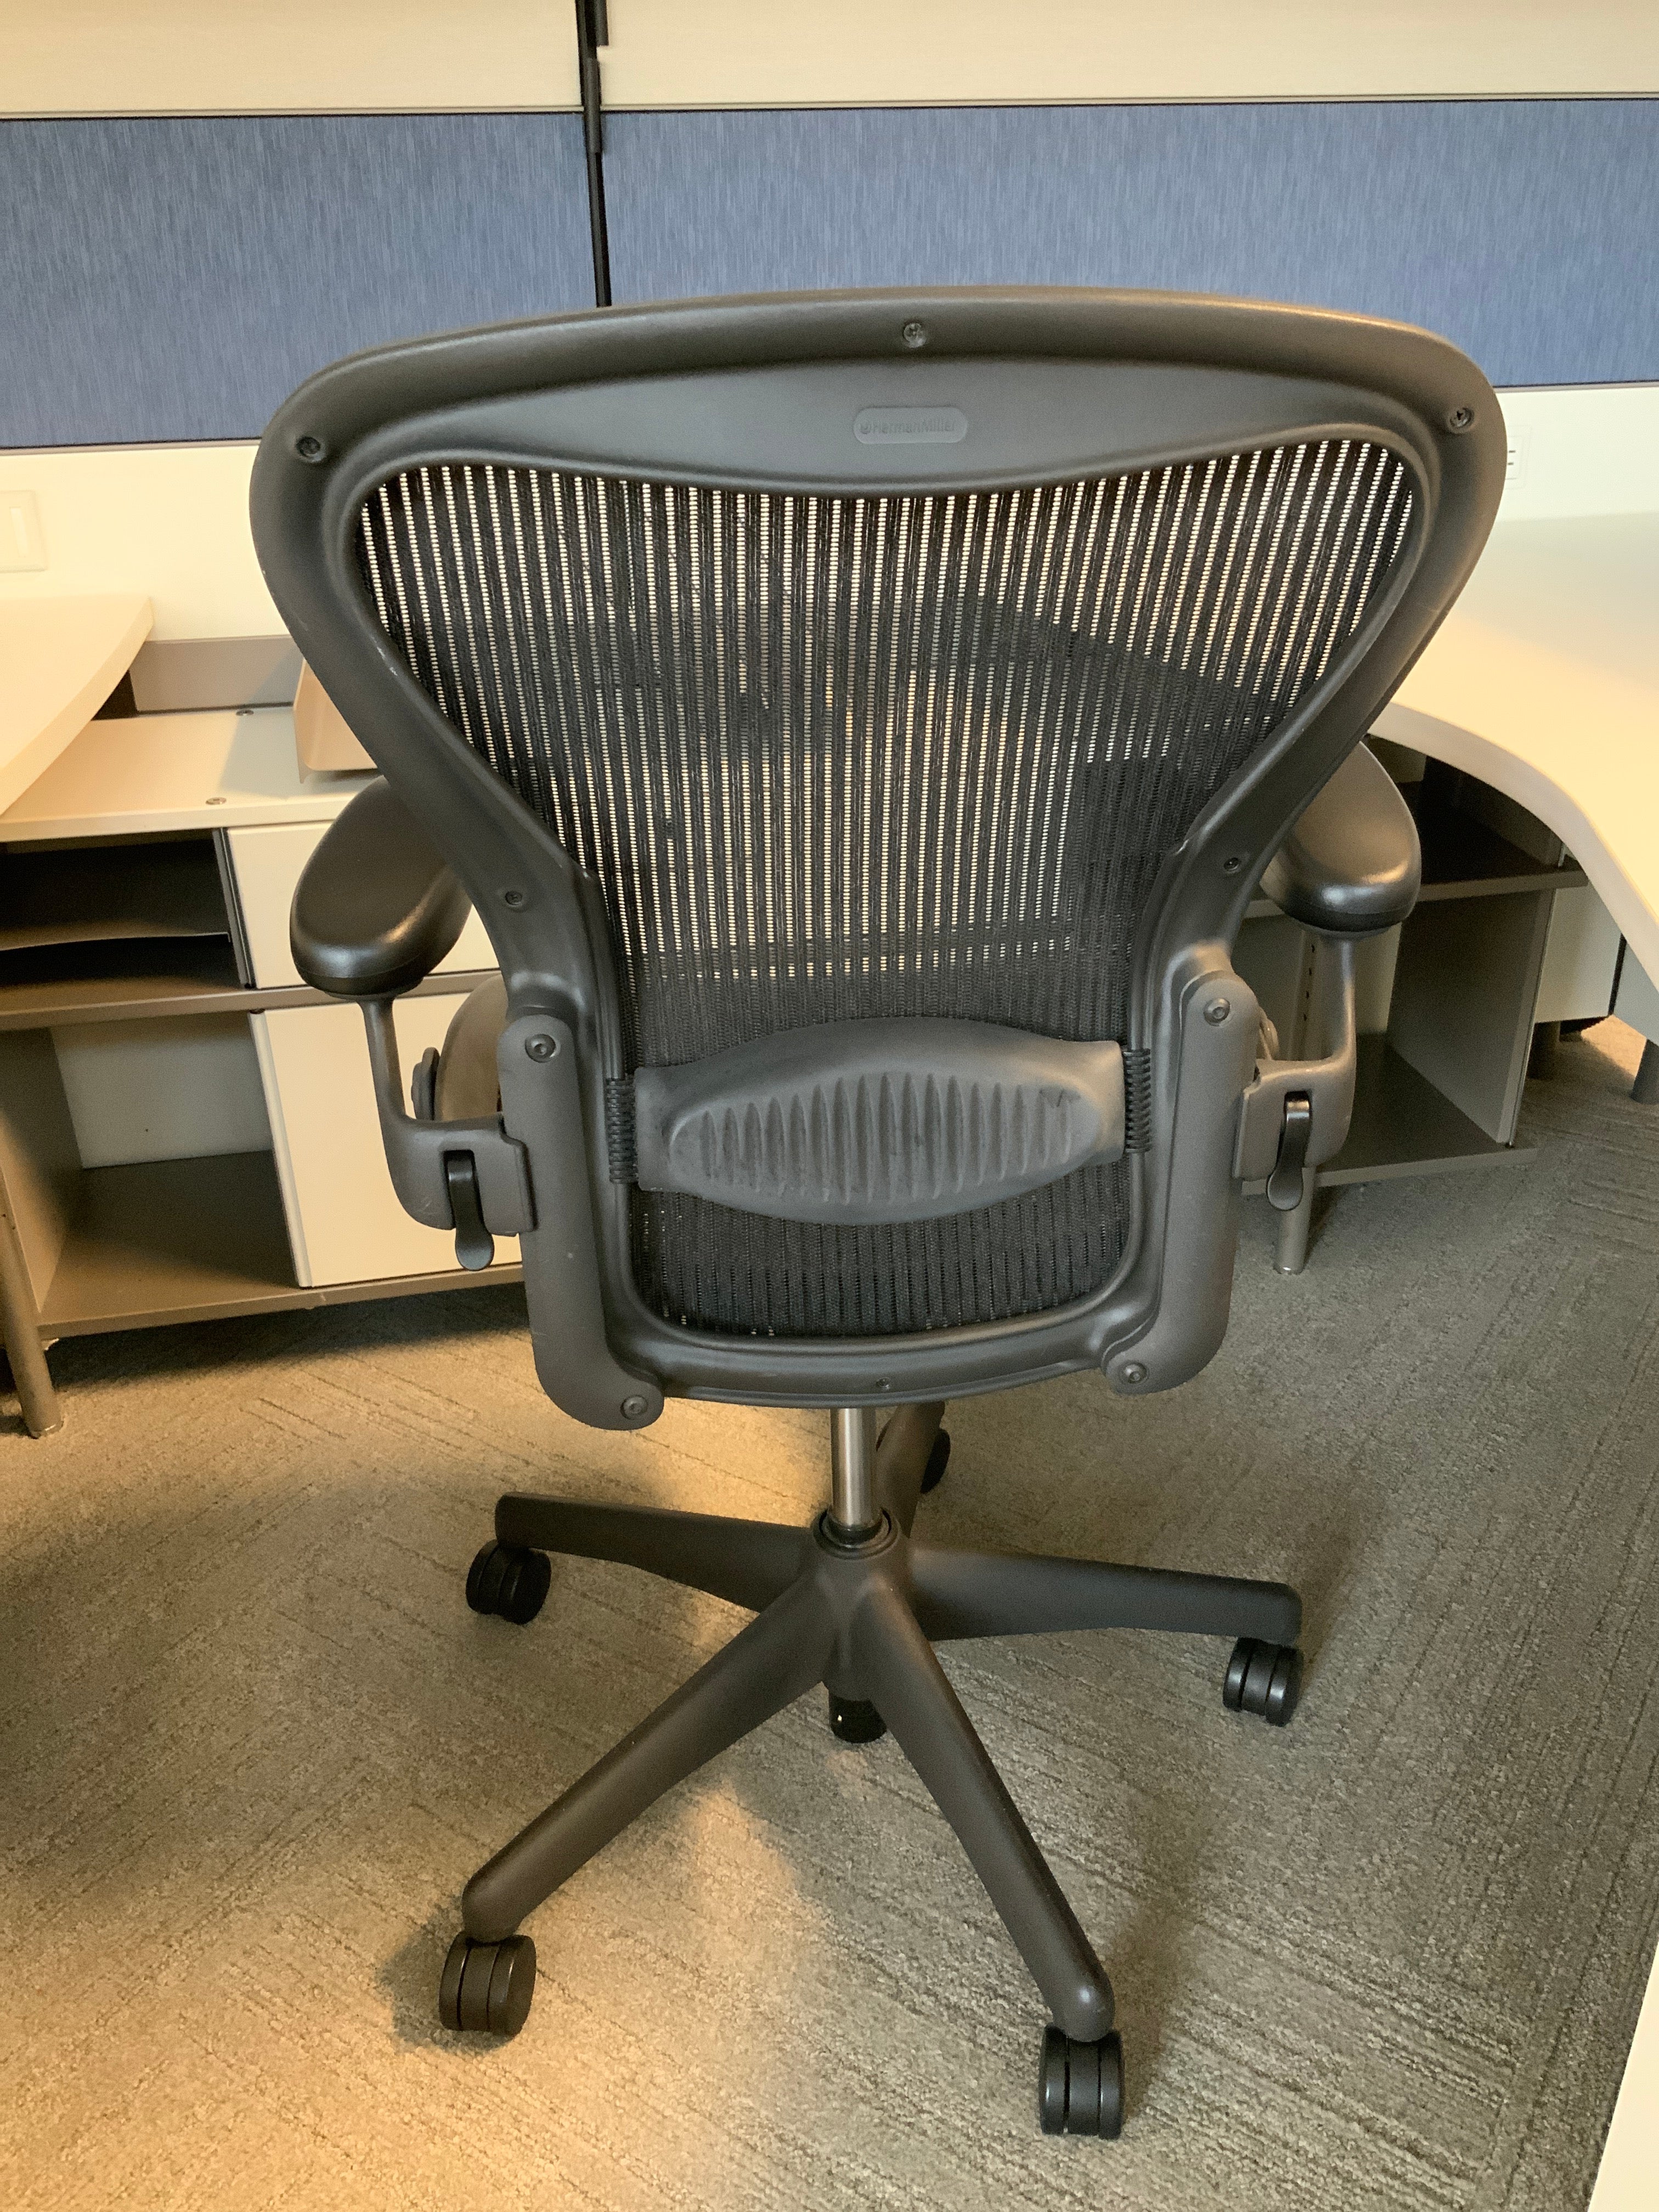 Herman Miller Carbon Aeron Task Chair Size A - Preowned - FOB Vernon Hills, IL (Min Purchase Qty = 20)